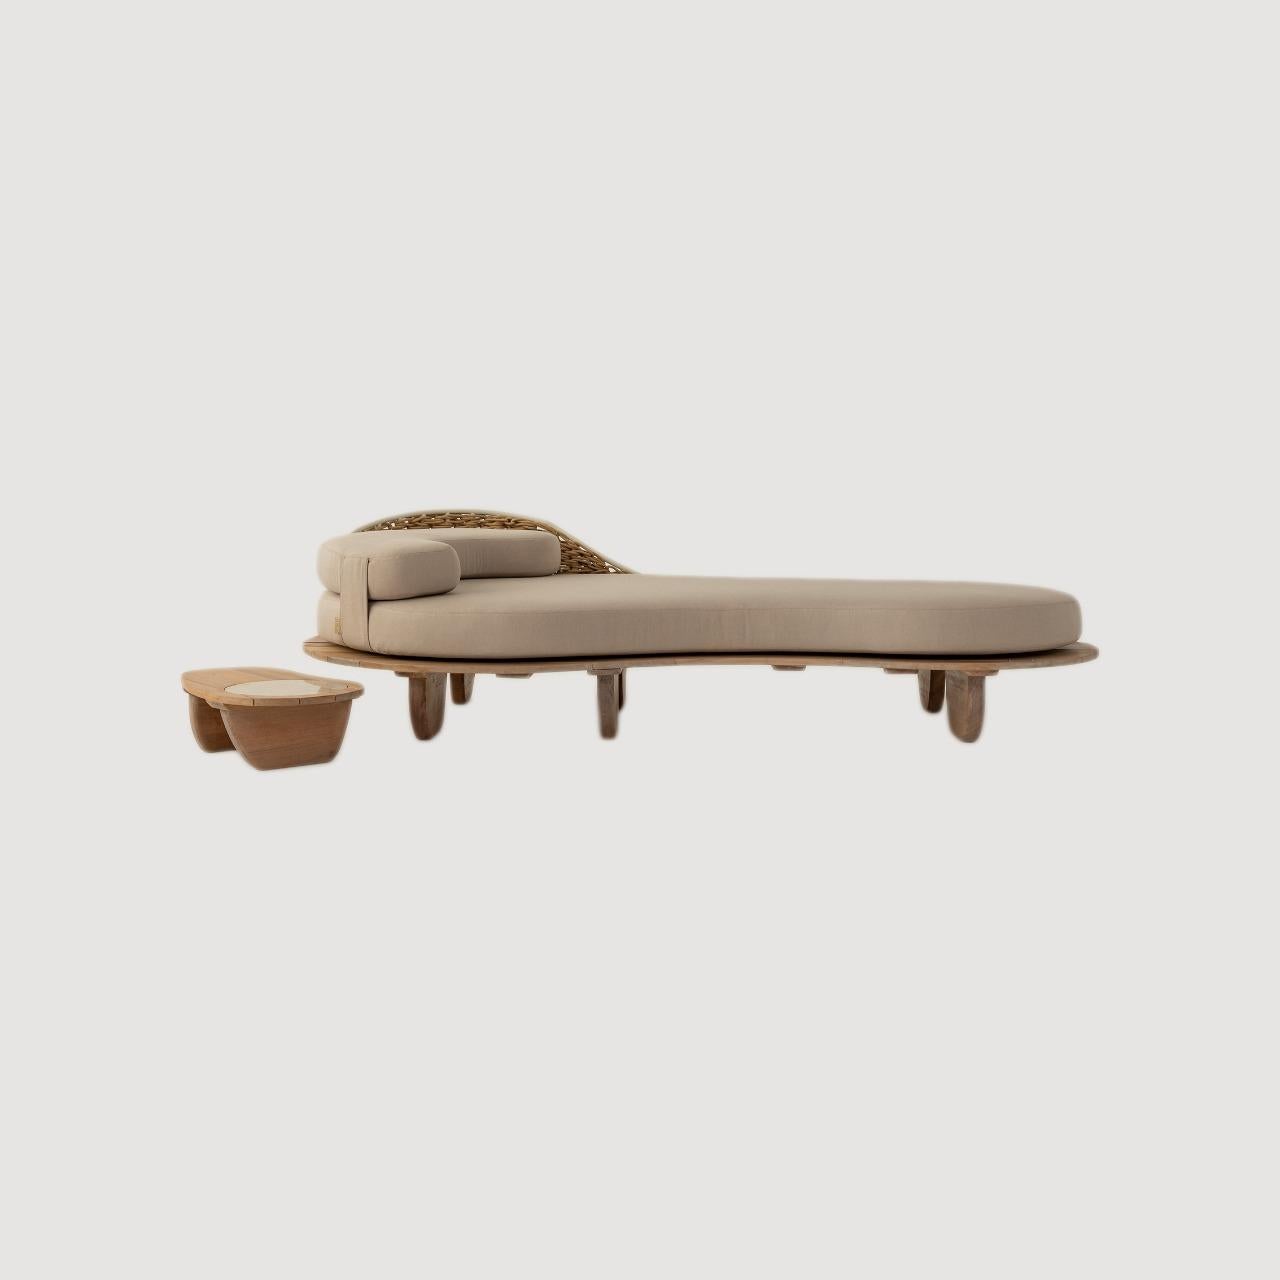 The Sayari Indoor / Outdoor Daybed Chaise and Table Collection by Studio Lloyd For Sale 2